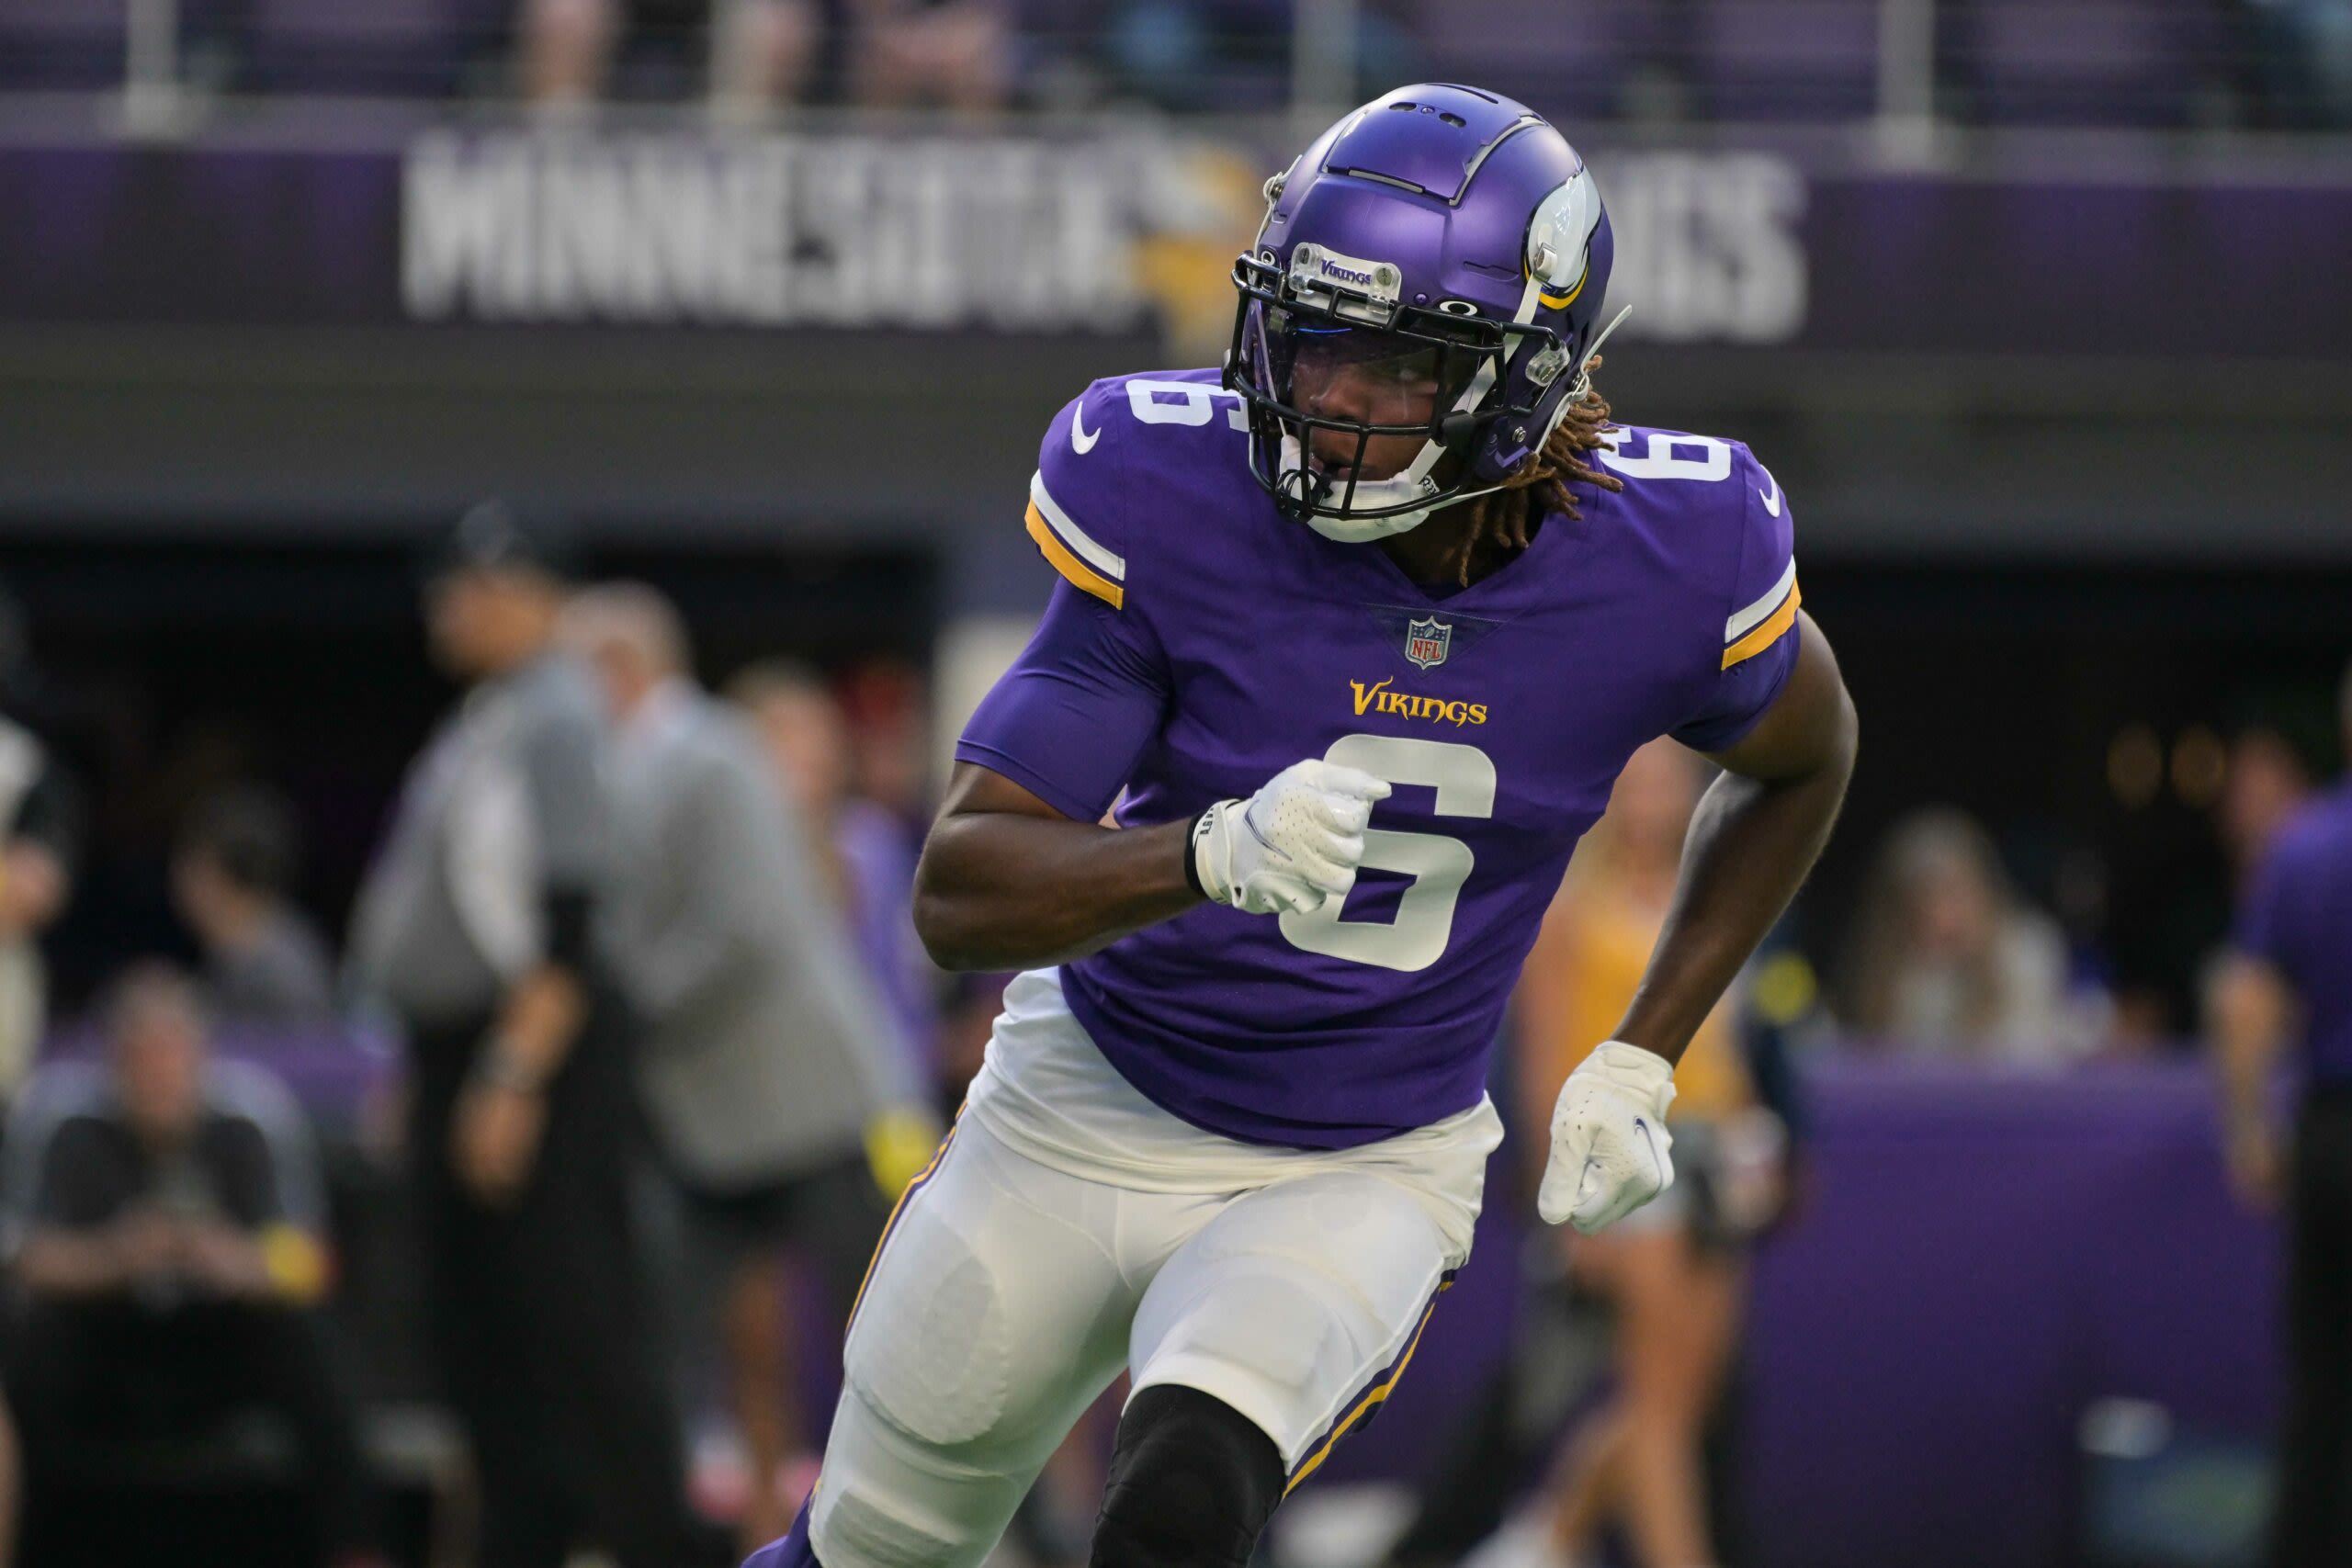 Vikings missed golden opportunity in draft-day trade that landed Lewis Cine